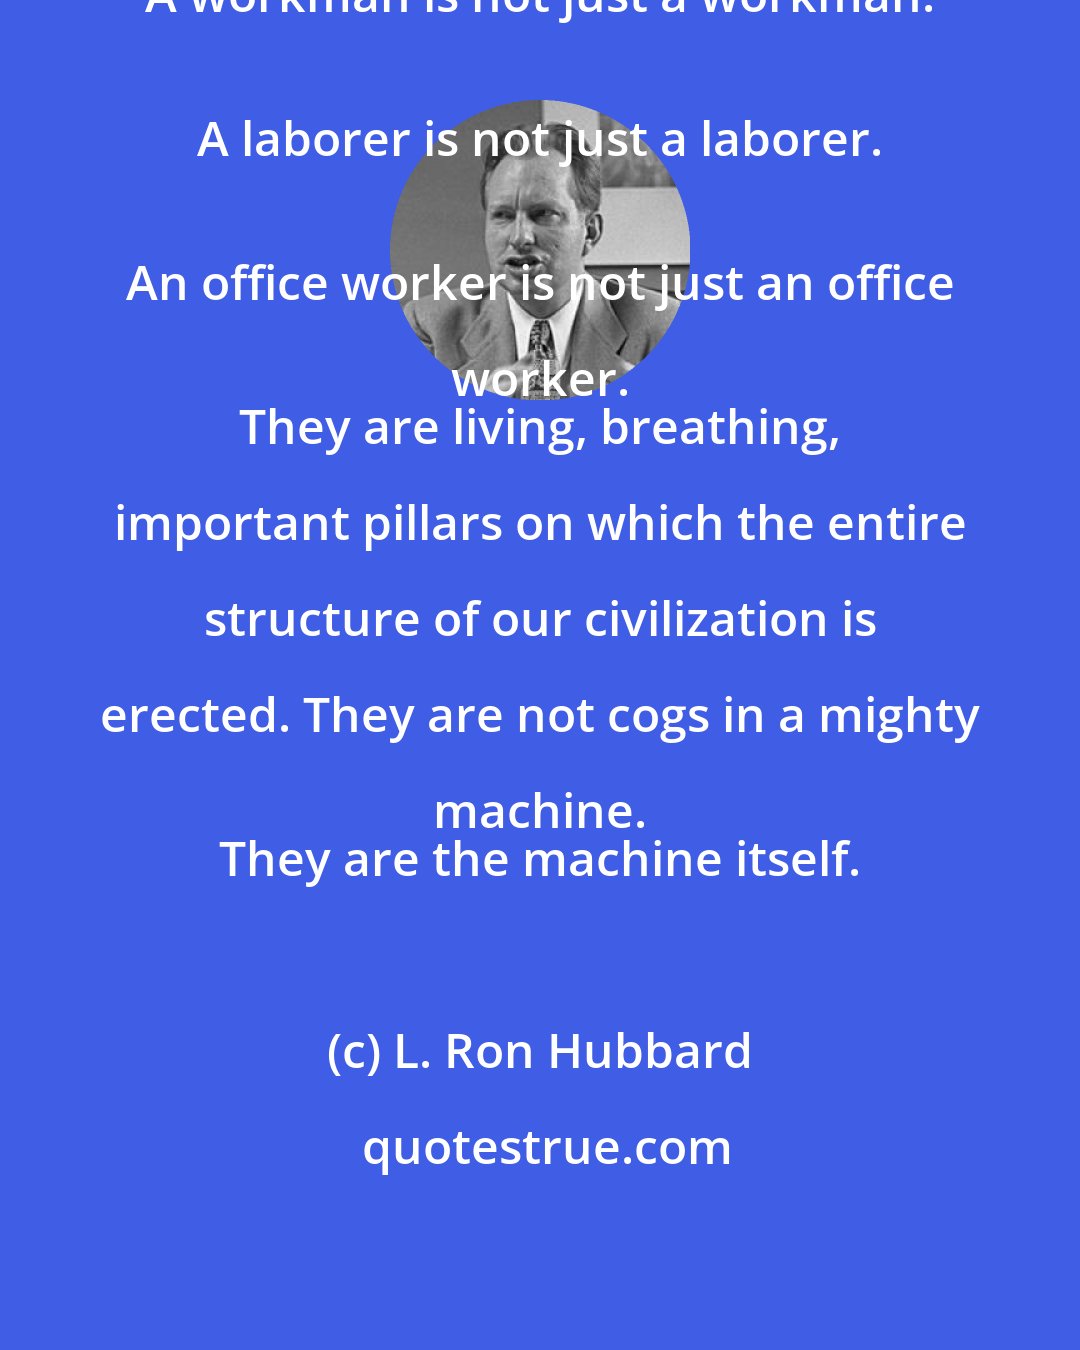 L. Ron Hubbard: A workman is not just a workman. 
 A laborer is not just a laborer. 
 An office worker is not just an office worker. 
 They are living, breathing, important pillars on which the entire structure of our civilization is erected. They are not cogs in a mighty machine. 
 They are the machine itself.